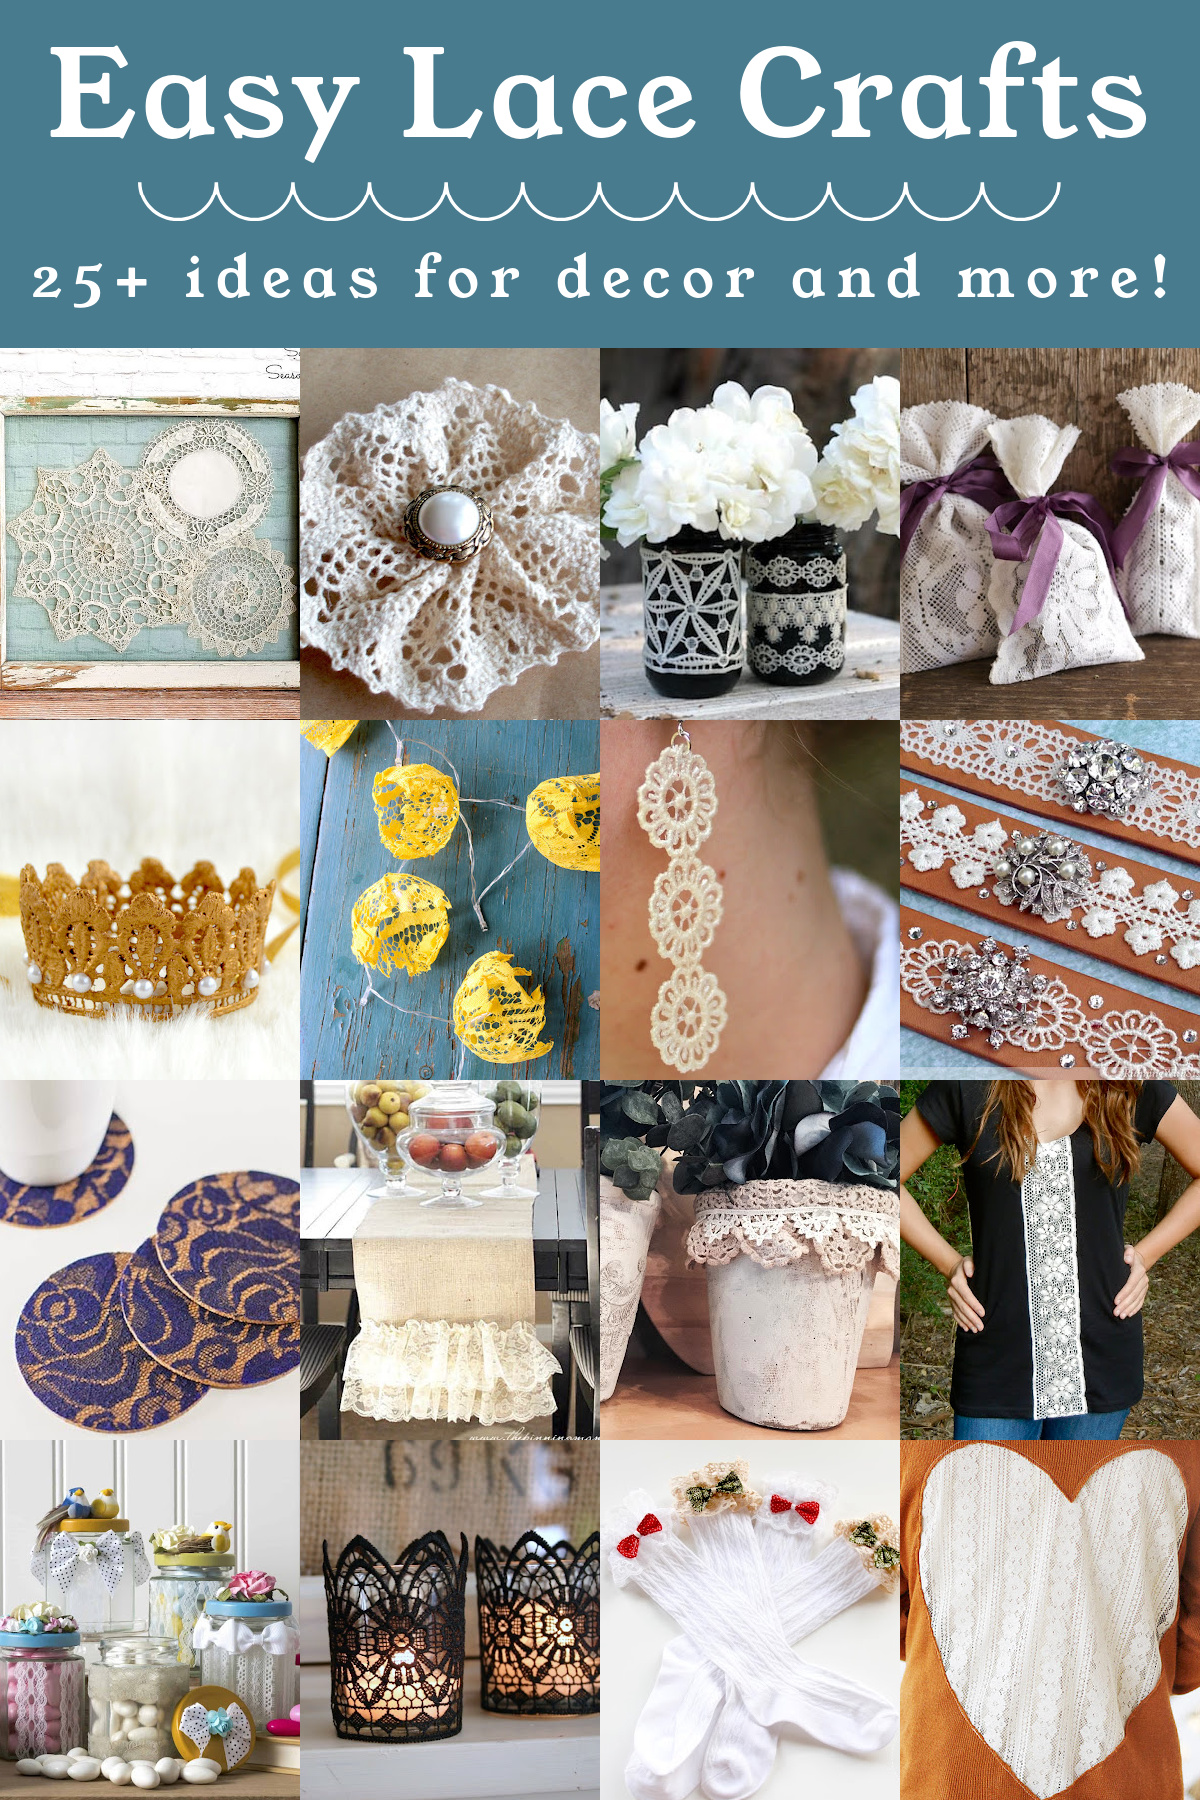 Easy Lace Crafts